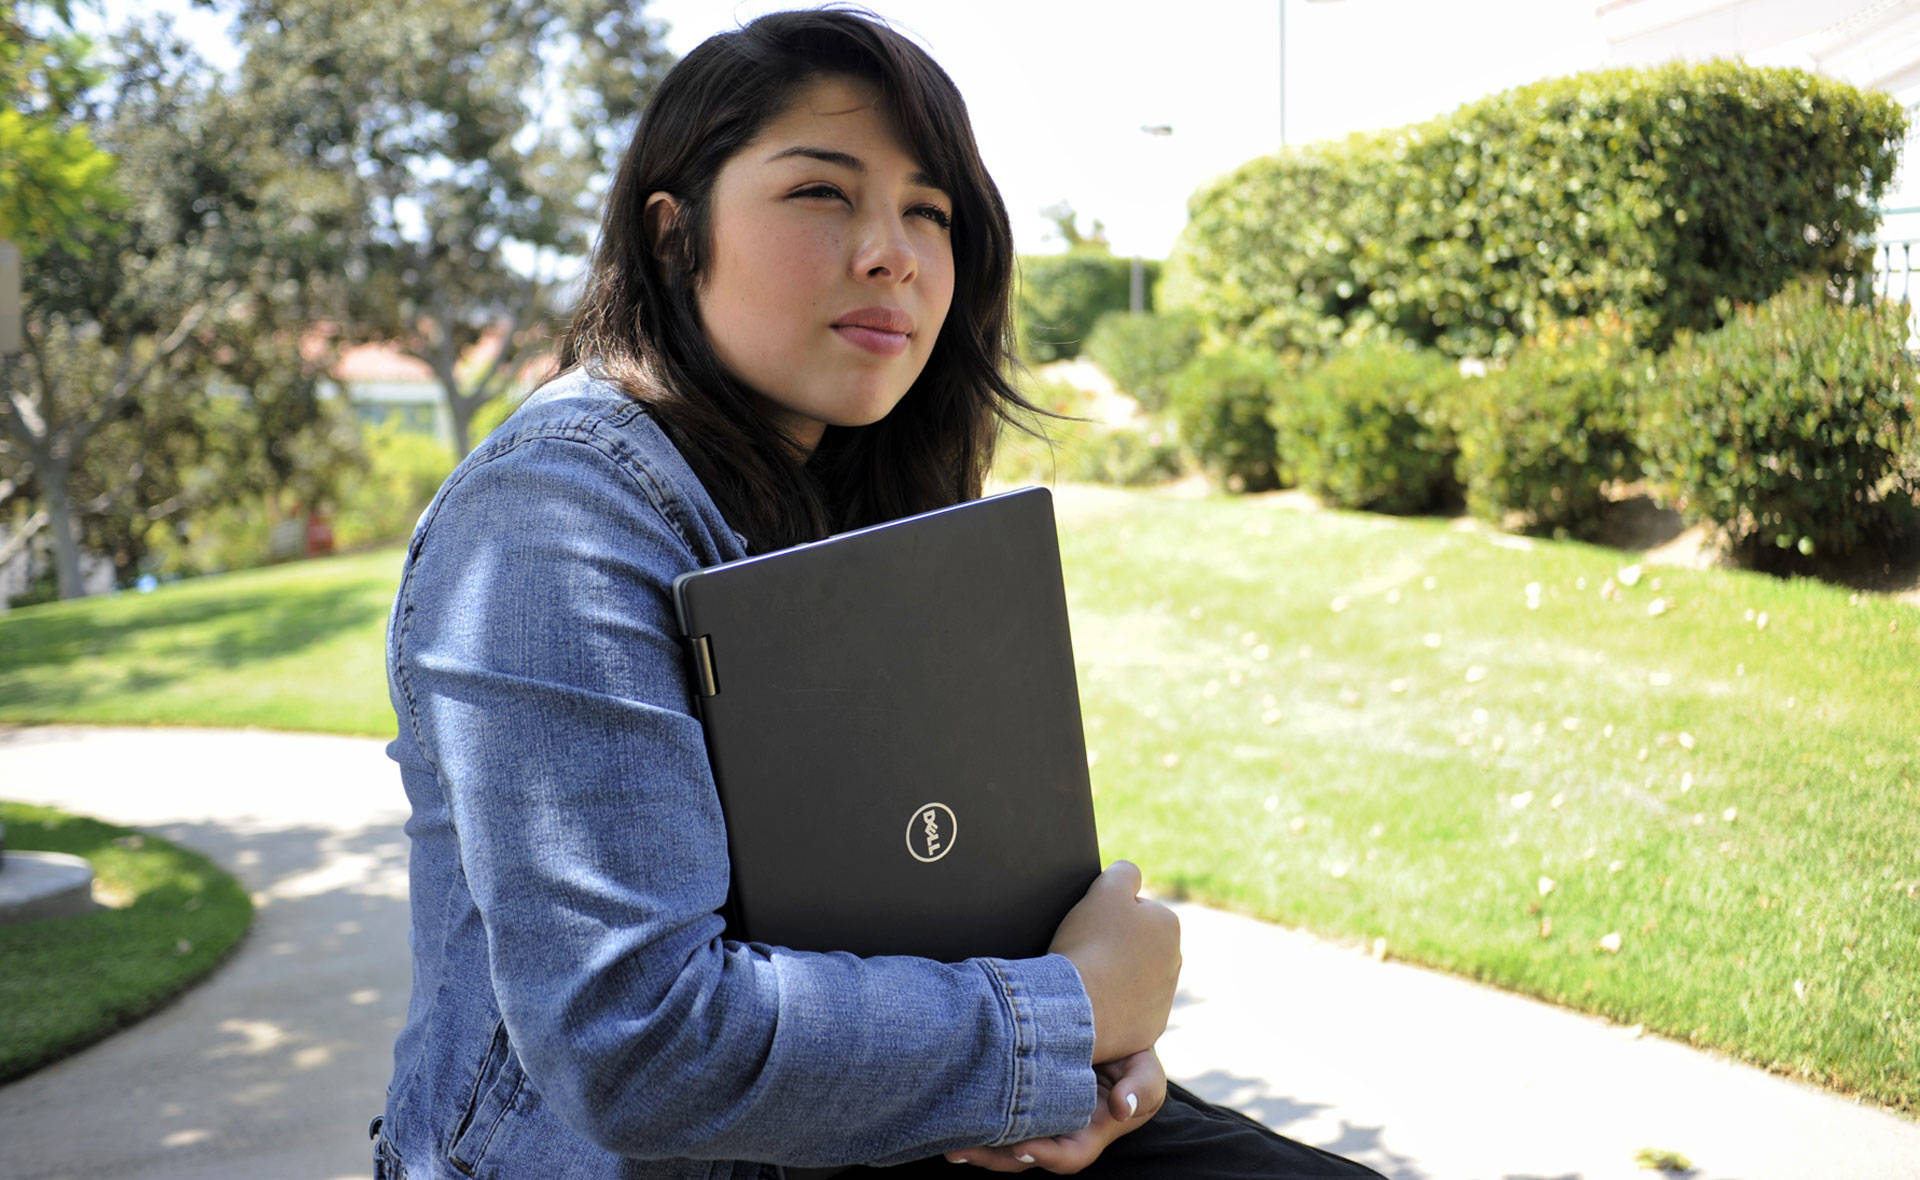 Dennisse Aldana, a student at Glendale Community College, received a refurbished laptop from iFoster. Blair Wells/KQED